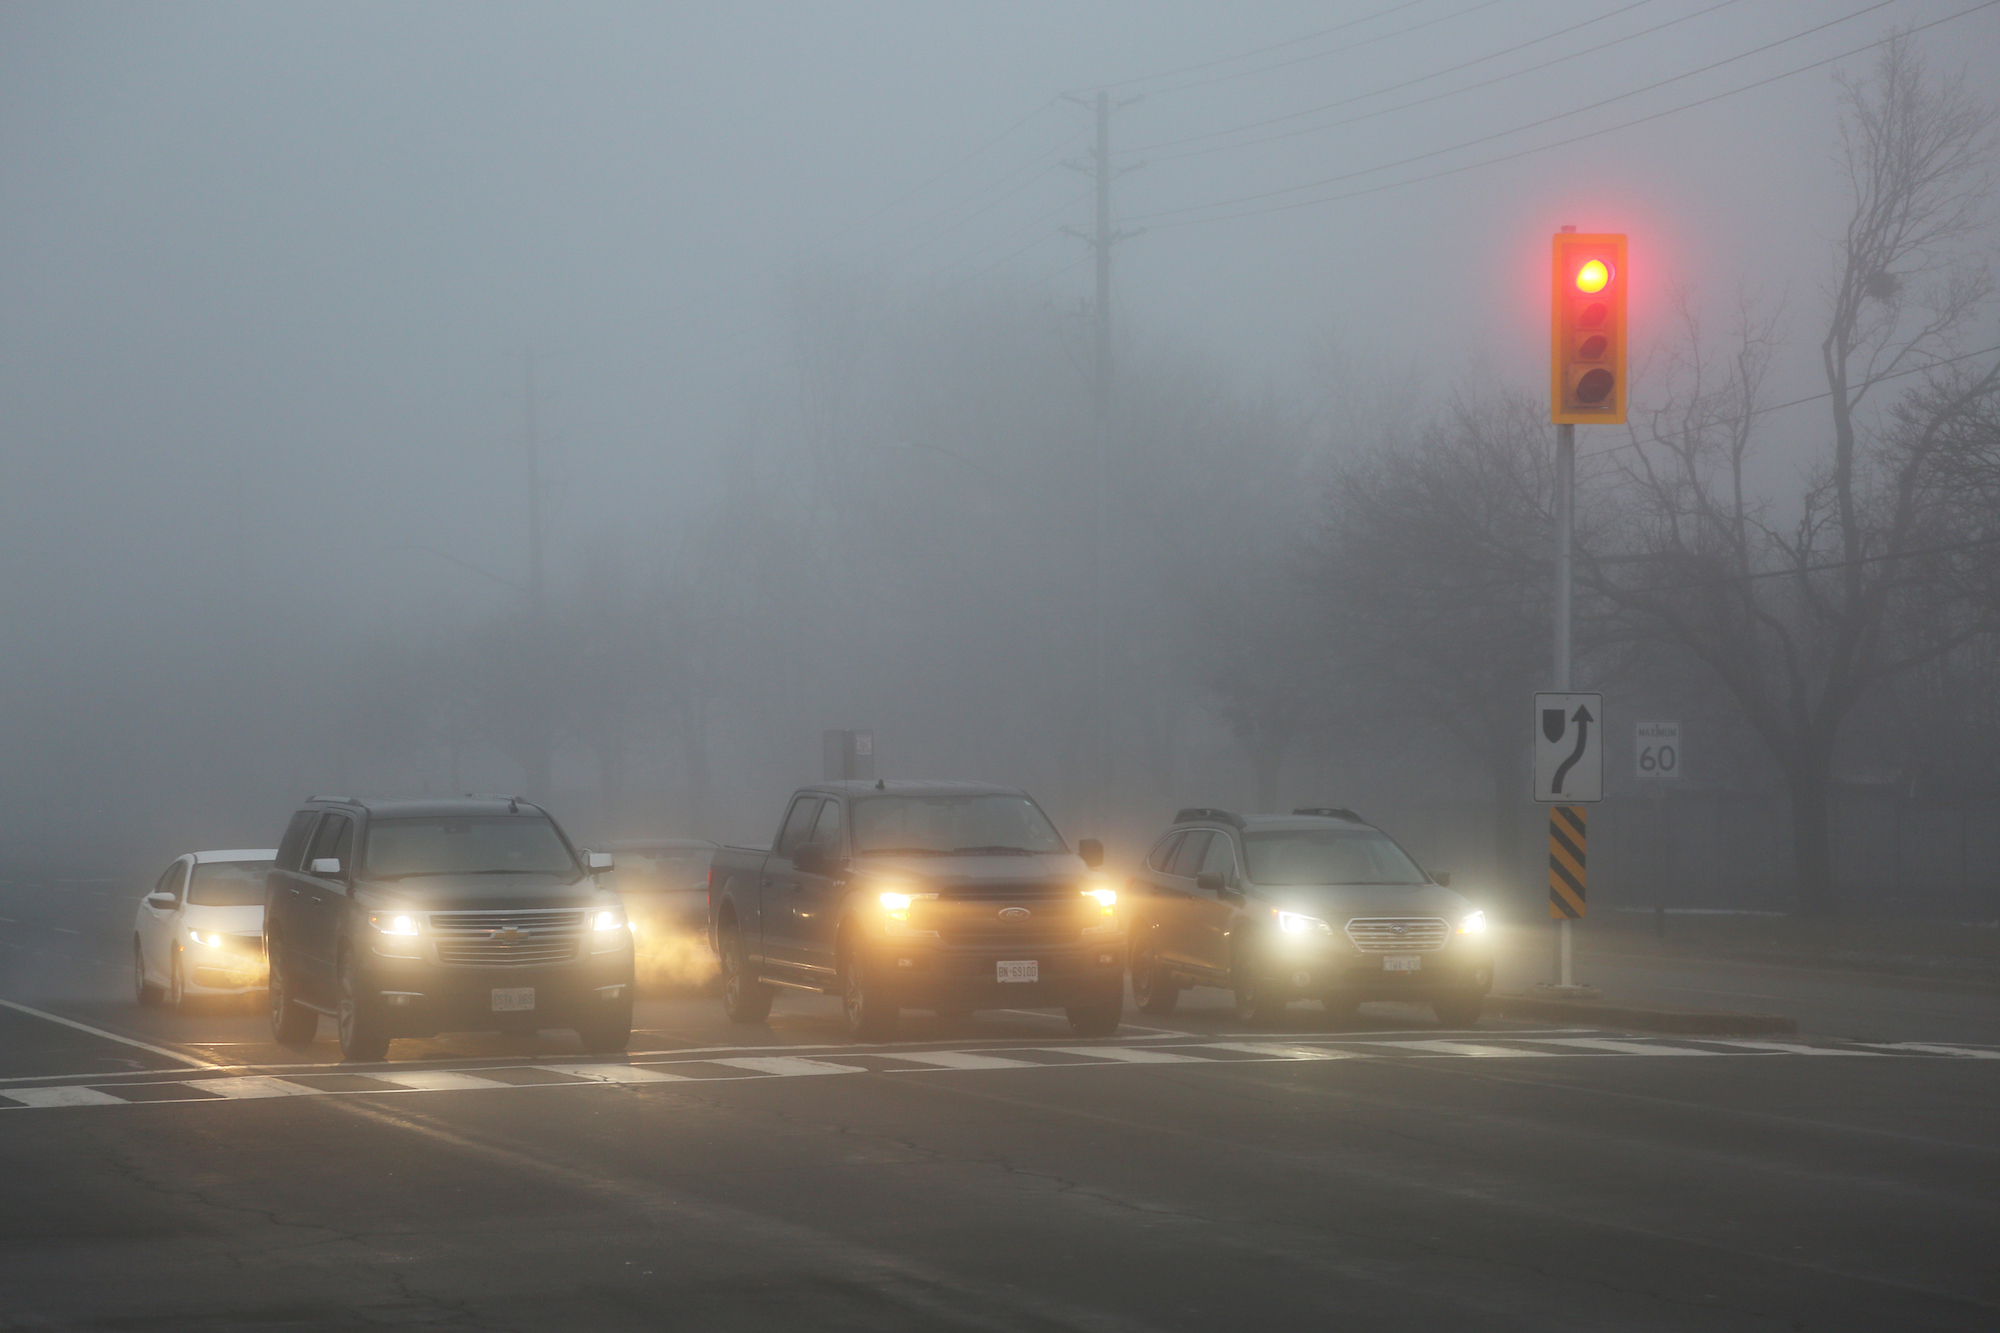 What should you not use if you encounter fog while driving?